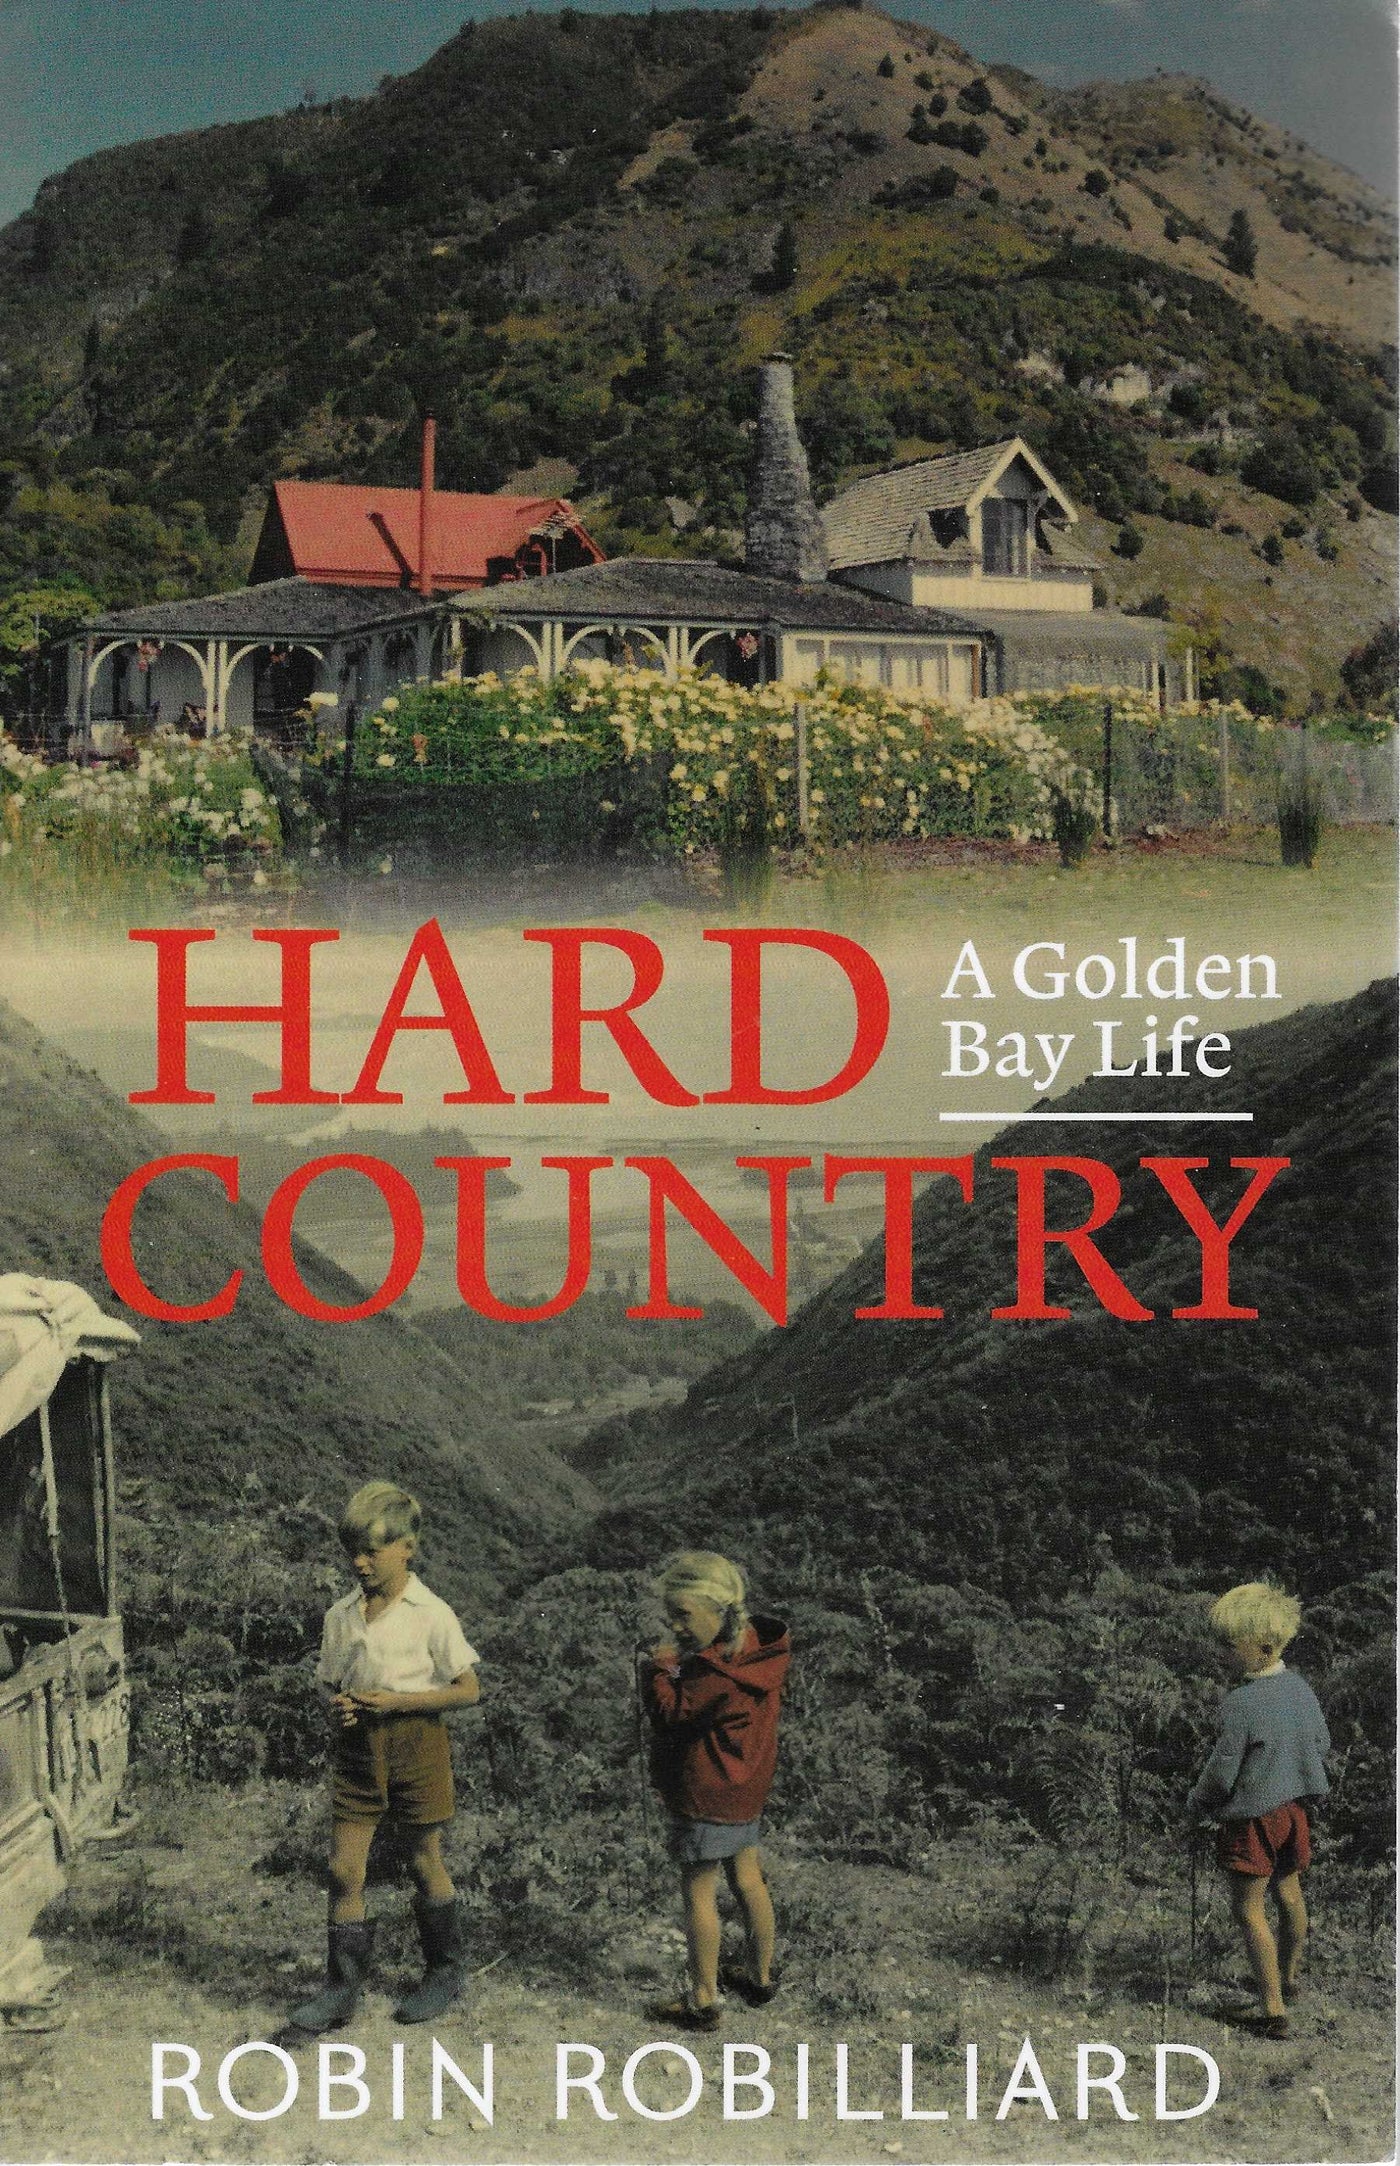 Hard Country: A Golden Bay Life